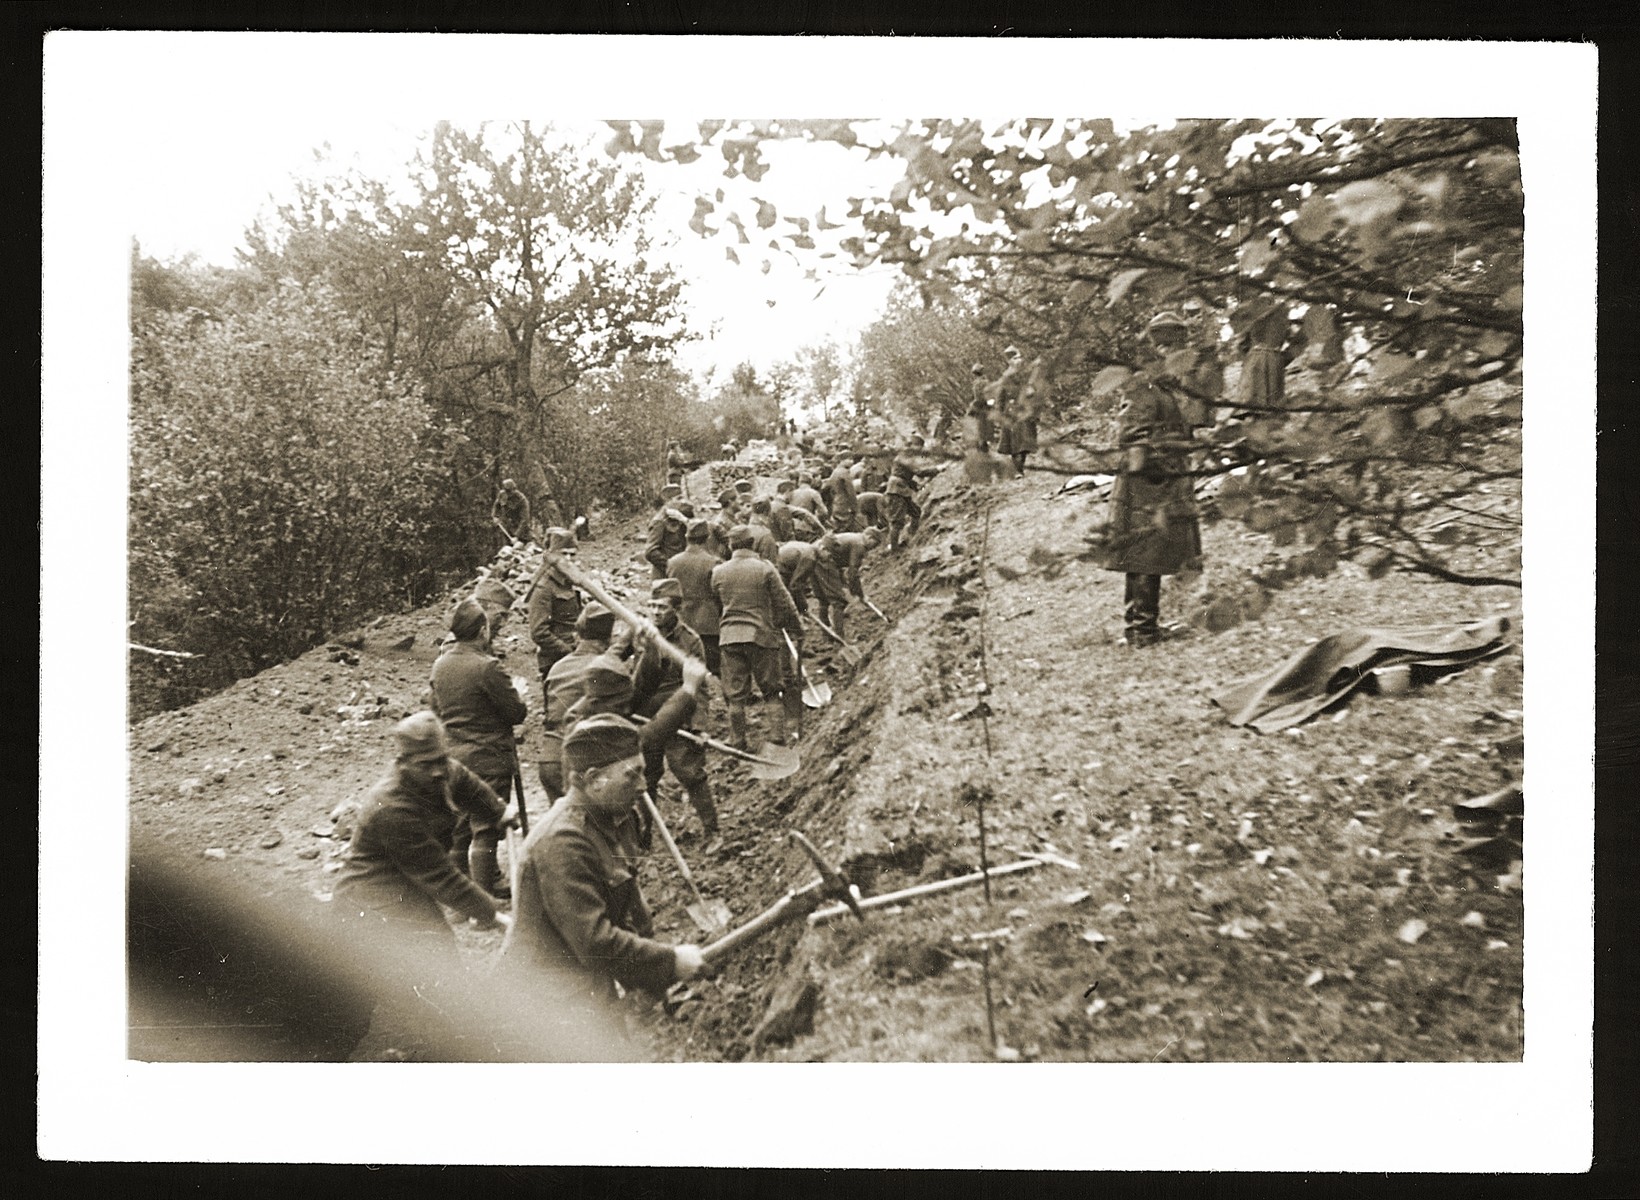 Jewish soldiers in the Slovak army dig a long trench. 

The Jewish units were assigned to manual labor and not permitted to carry weapons.